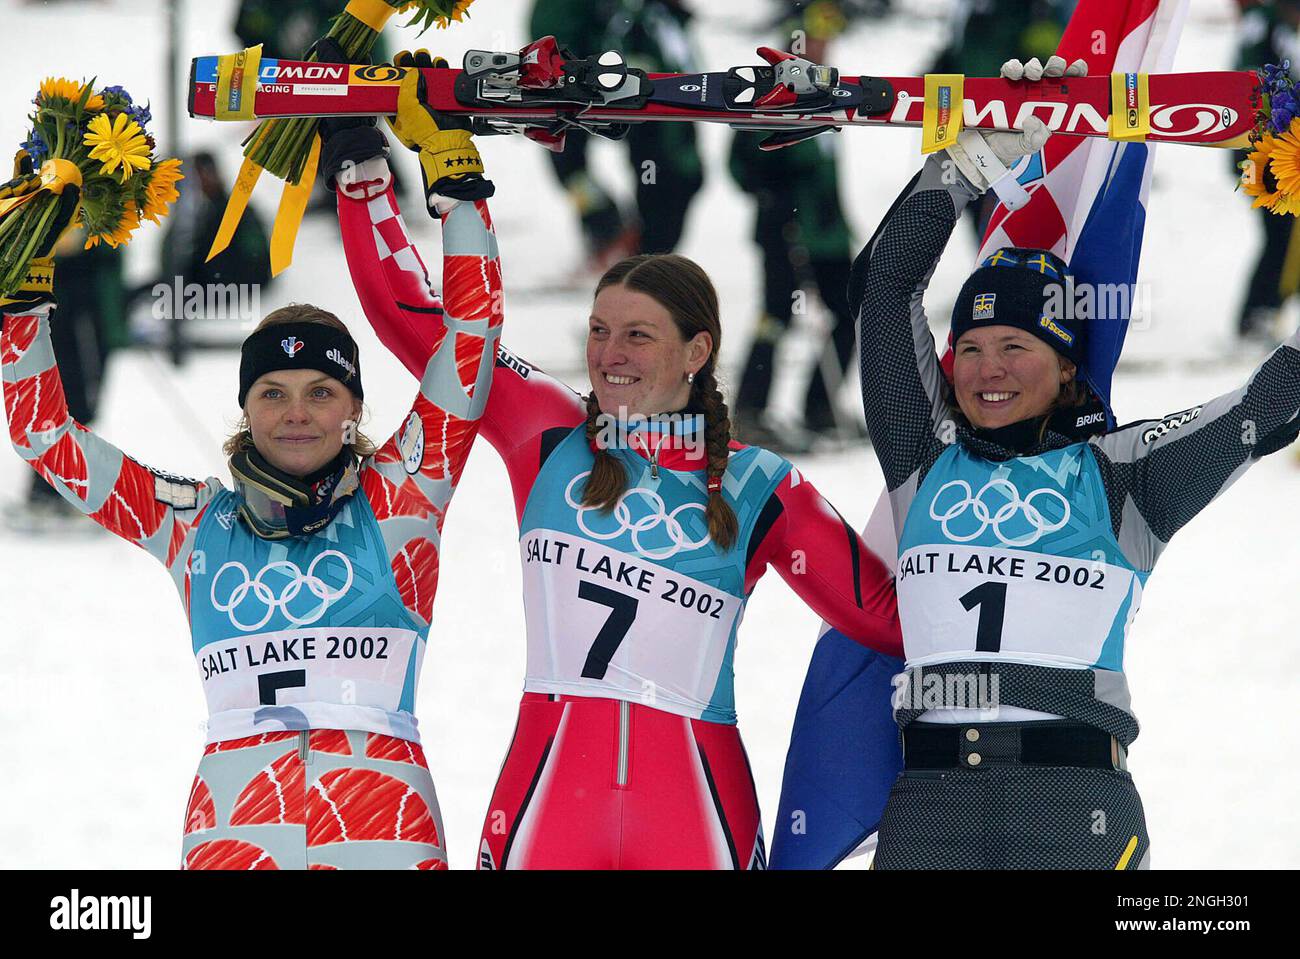 Croatia's Janica Kostelic, center, celebrates with Laura Pequegnot of France, left, and Anja Paerson of Sweden, right, at the end of the Women's Slalom at the Salt Lake City Winter Olympic Games in Deer Valley, Utah Wednesday Feb. 20, 2002. Kostelic won the gold medal, Pequegnot the silver and Paerson the bronze. (AP Photo/Thomas Kienzle) Stock Photo